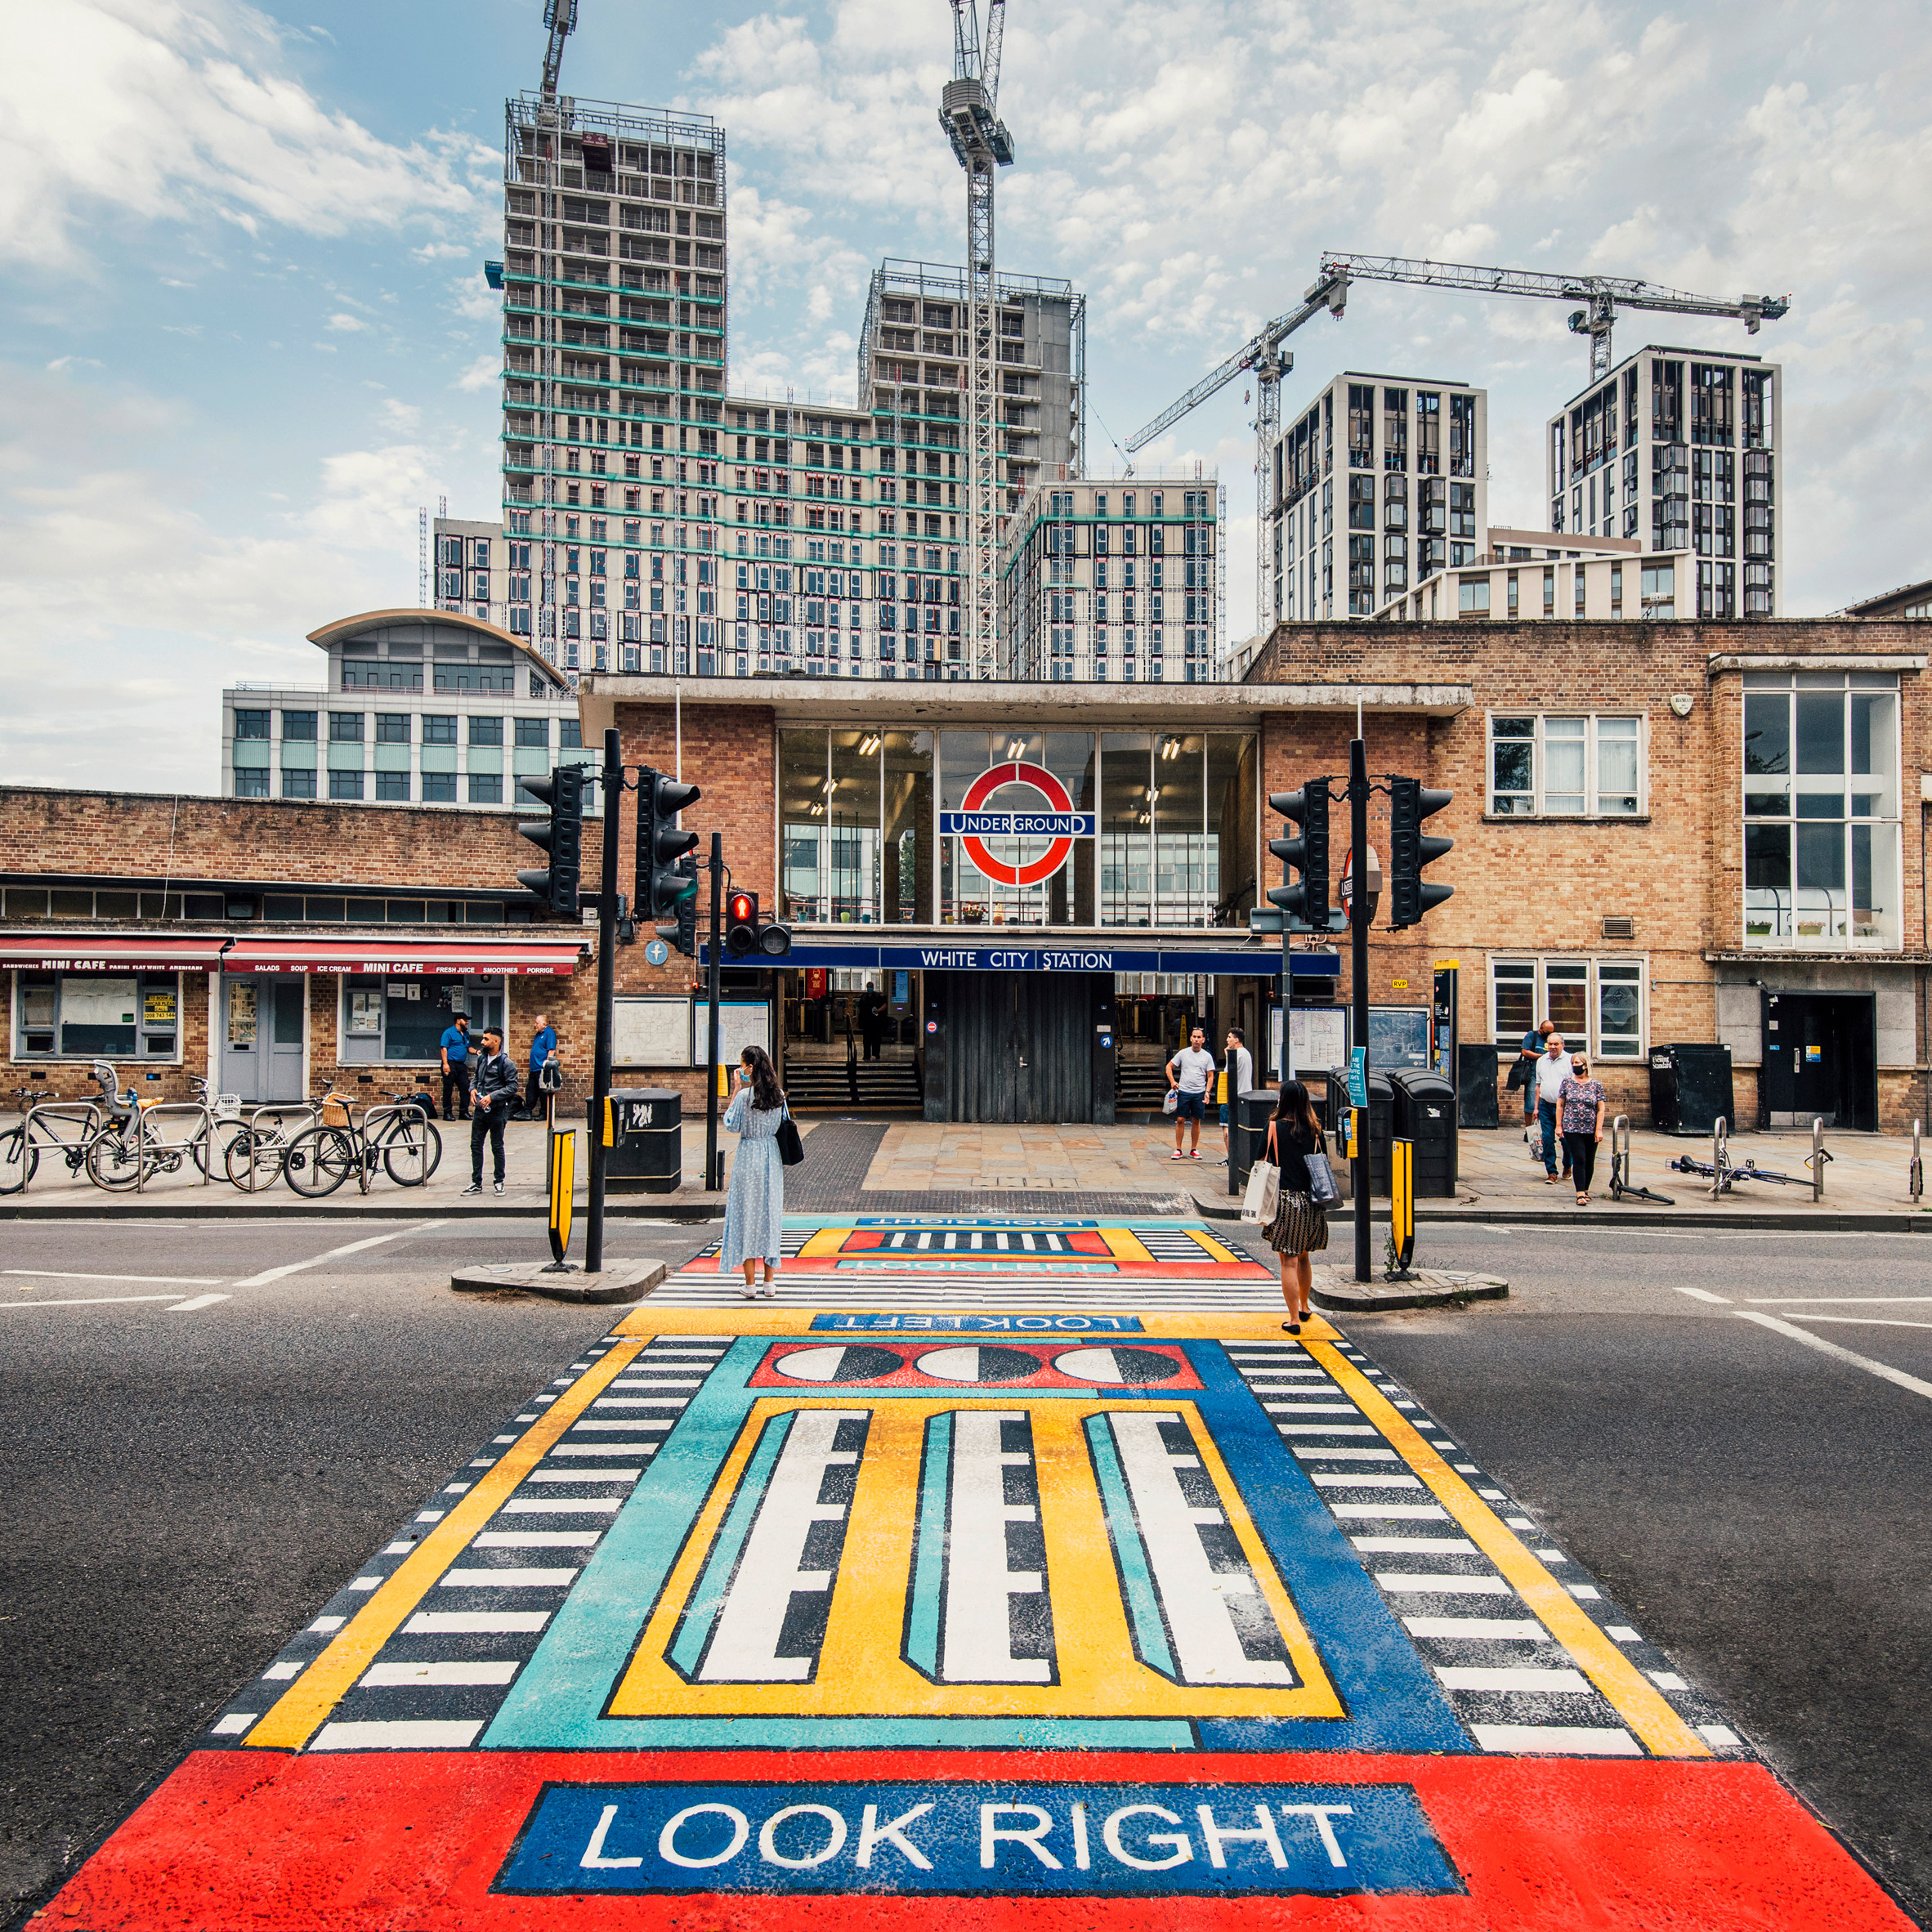 Camille Walala artwork pays homage to West London architecture